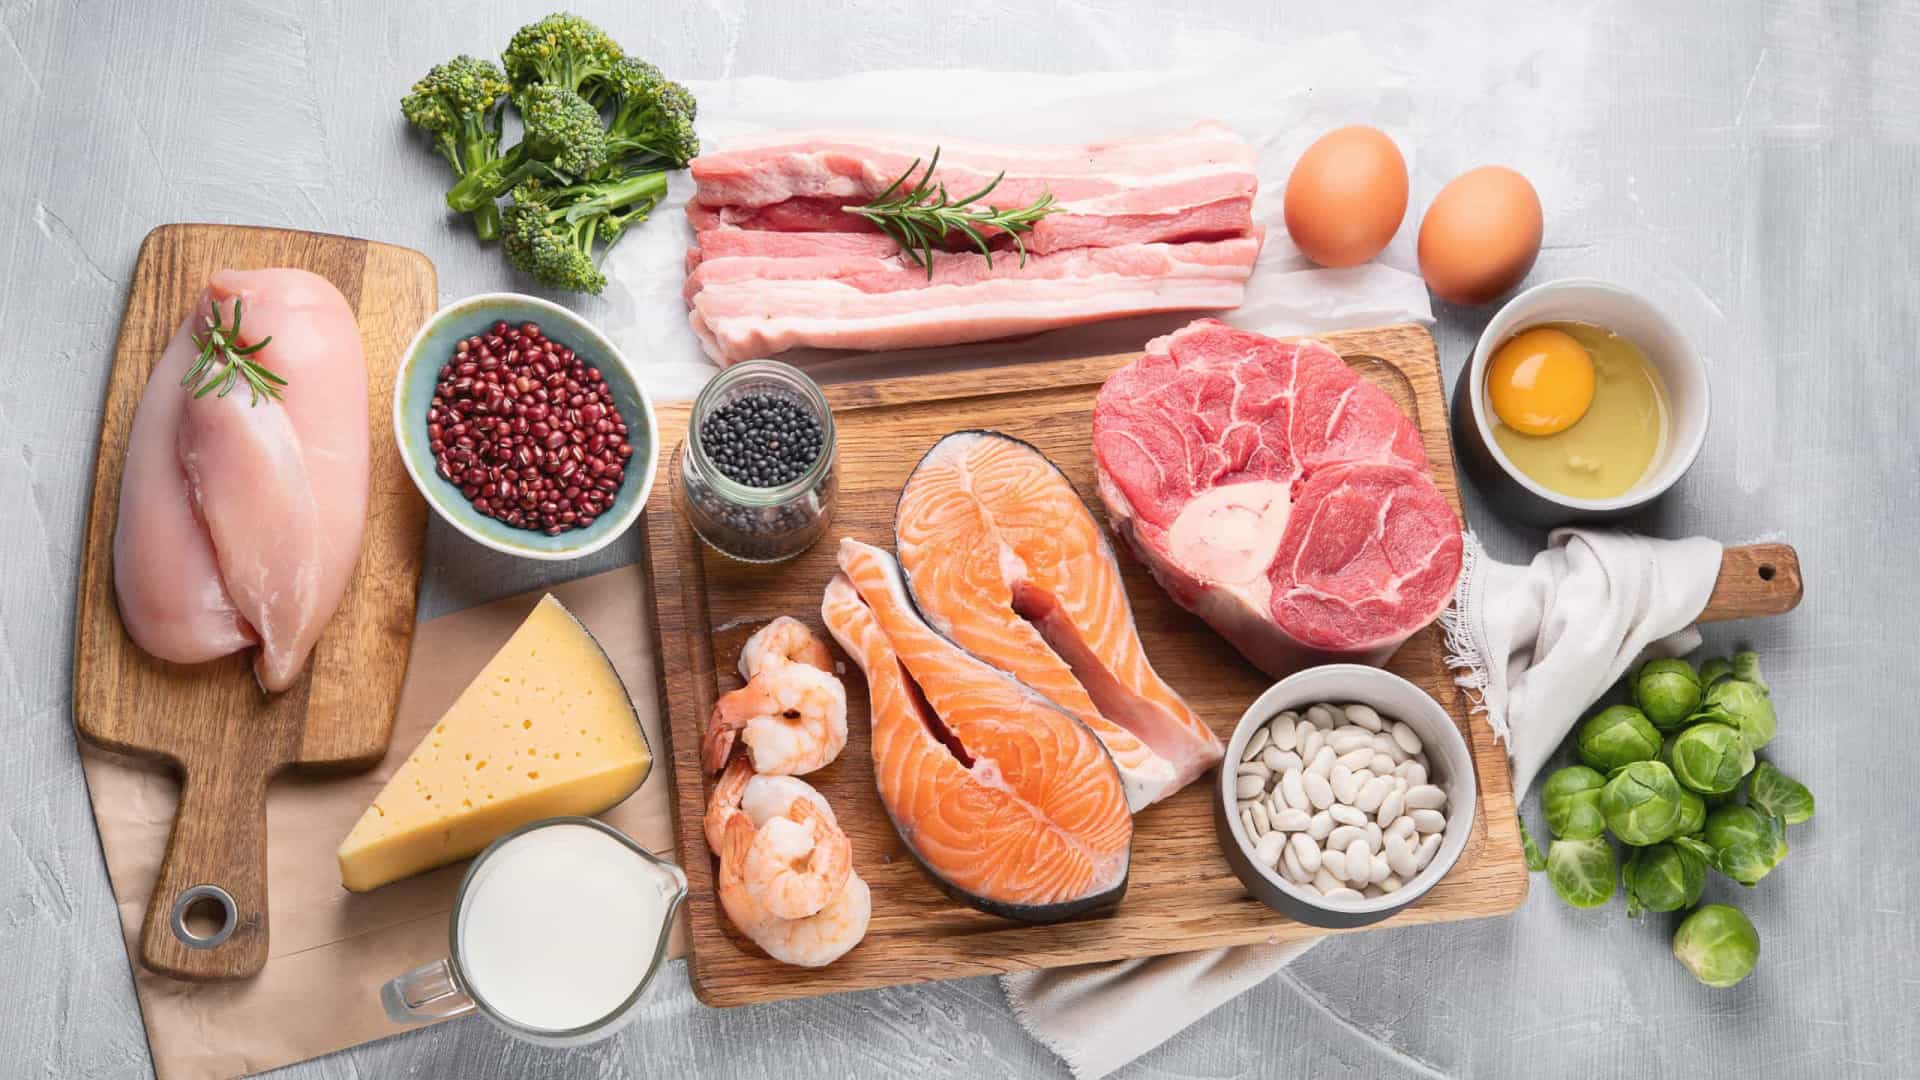 <p>A meal high in protein and fat is a safer bet when it comes to sustaining your energy levels. "If your pre-dental meal doesn't sustain you throughout your appointment, this could leave you feeling restless, irritable, and even light-headed mid-appointment," explains doctor of dental surgery Brandon Cooley.</p><p><a href="https://www.msn.com/en-us/community/channel/vid-7xx8mnucu55yw63we9va2gwr7uihbxwc68fxqp25x6tg4ftibpra?cvid=94631541bc0f4f89bfd59158d696ad7e">Follow us and access great exclusive content everyday</a></p>